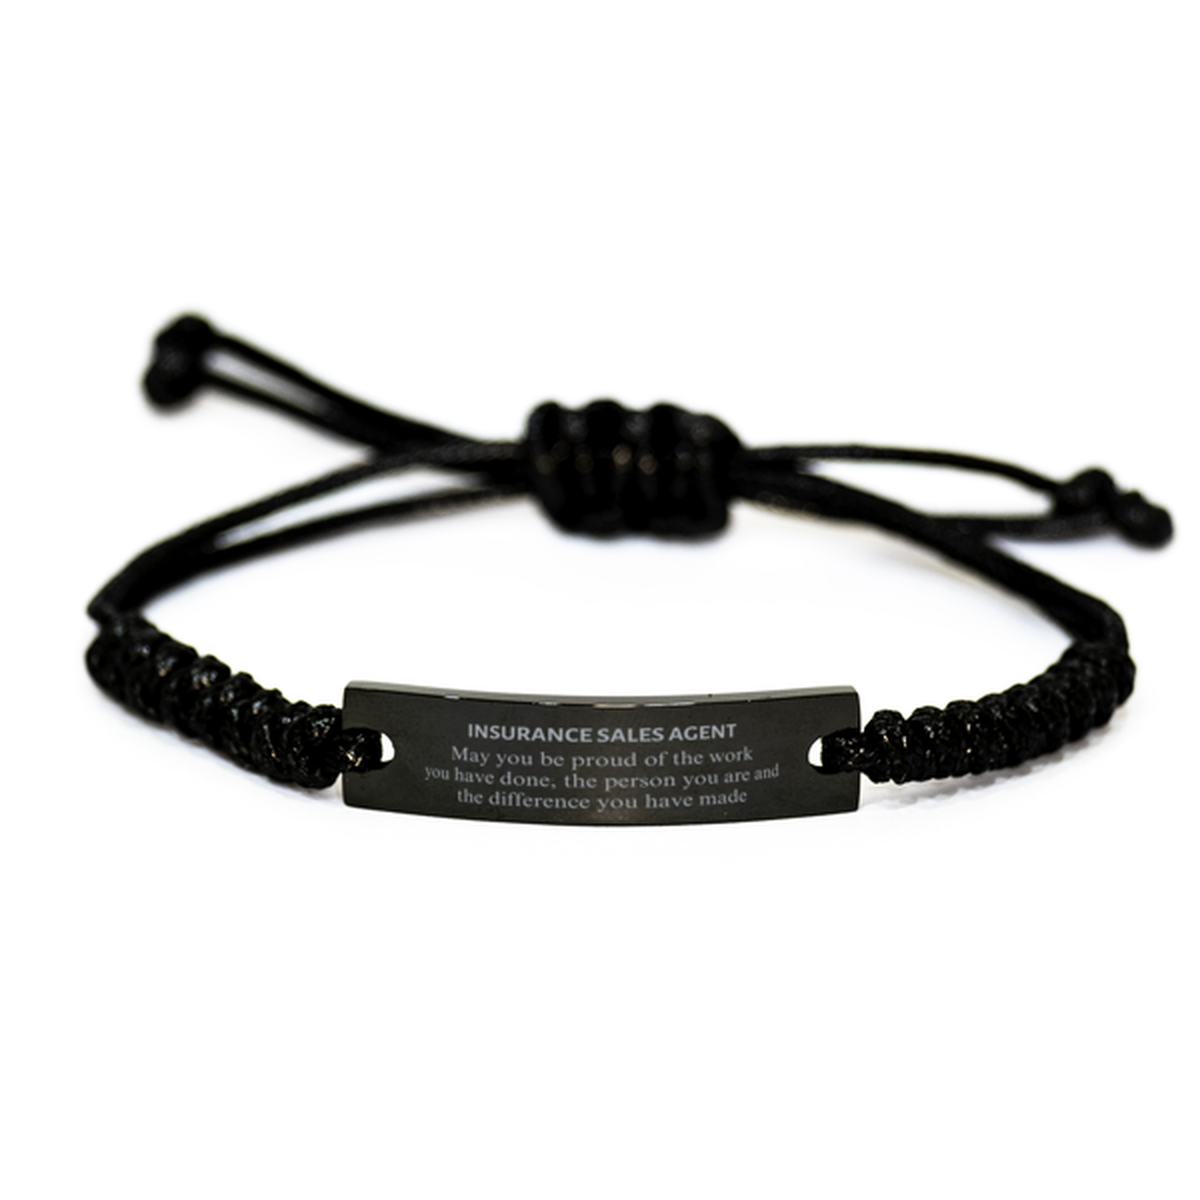 Insurance Sales Agent May you be proud of the work you have done, Retirement Insurance Sales Agent Black Rope Bracelet for Colleague Appreciation Gifts Amazing for Insurance Sales Agent